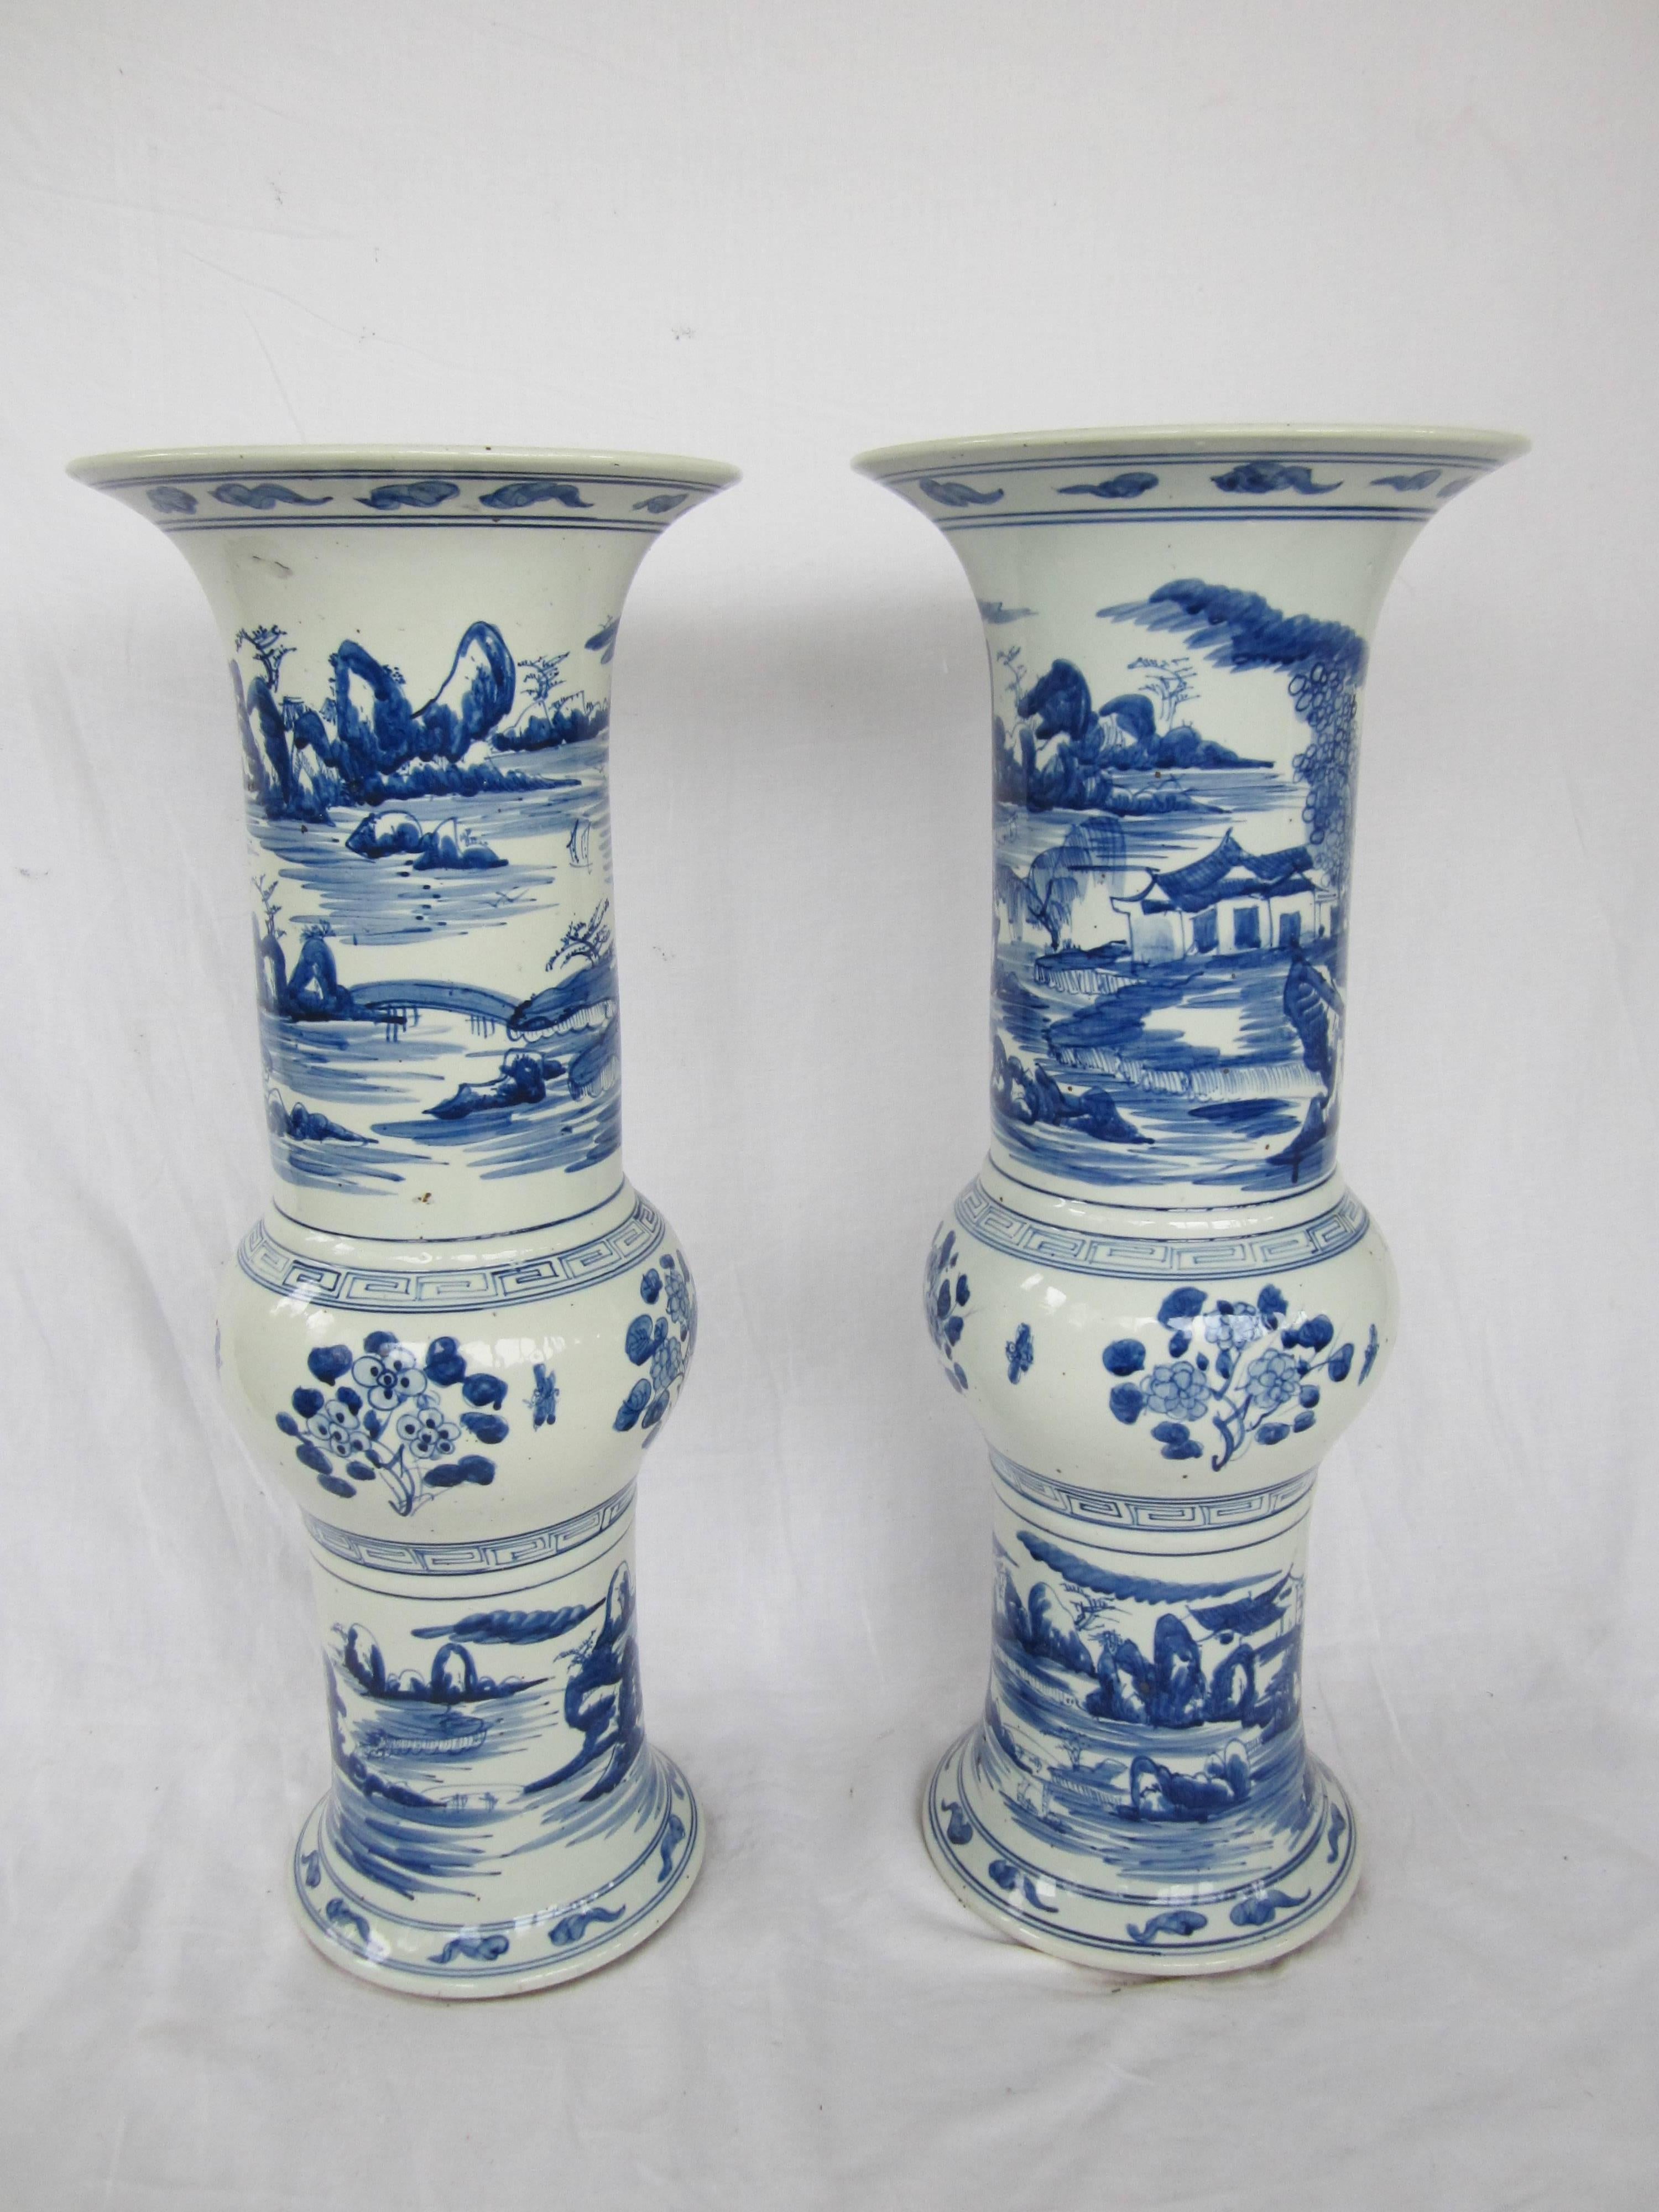 Pair of large blue and white Chinese trumpet vases.